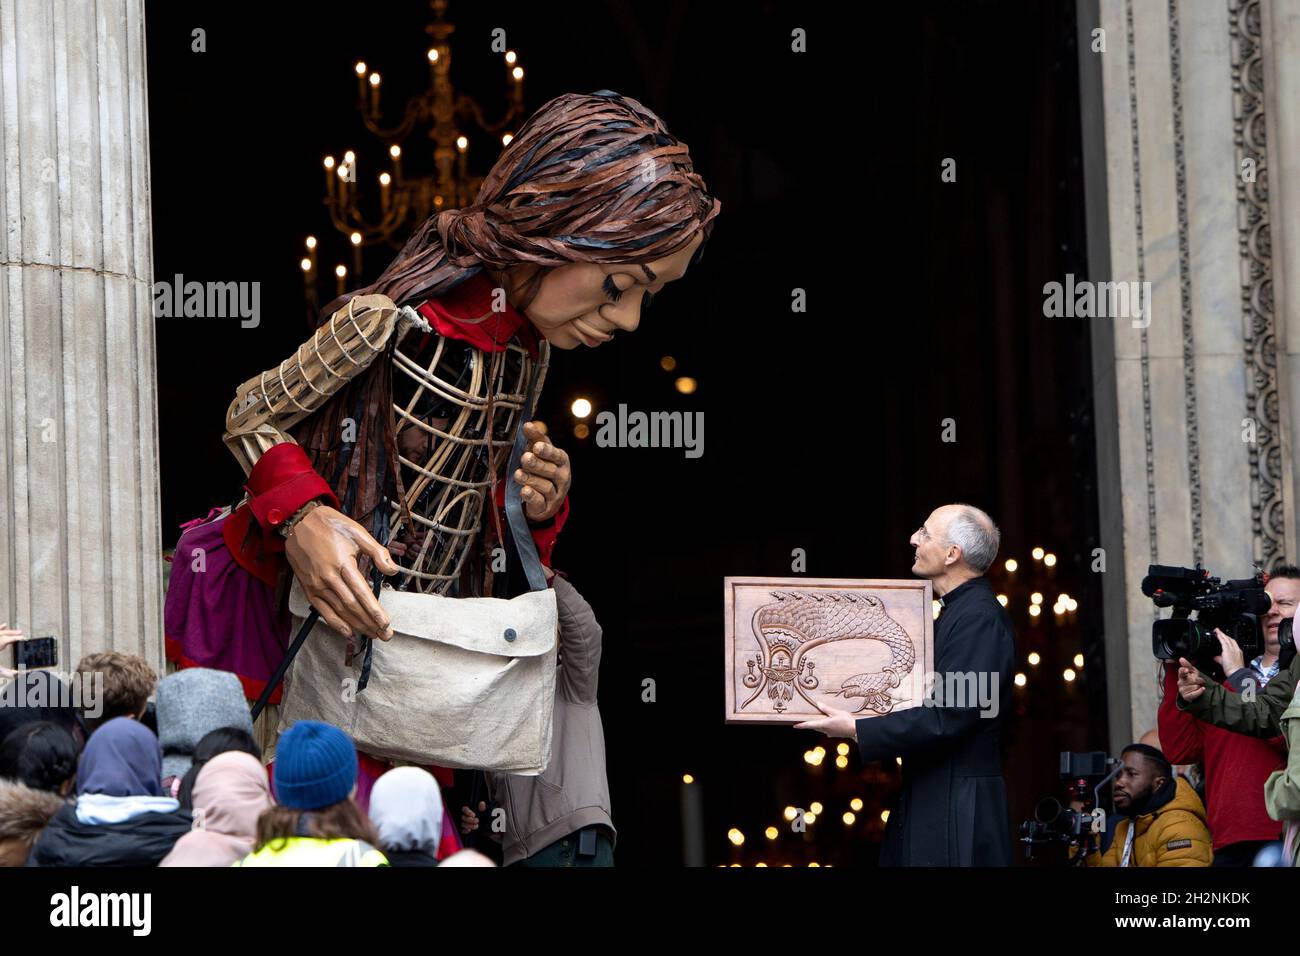 The Pastor from the St Paul Cathedral receives the token of appreciation from the Little Amal.Little Amal, a 3.5 meters tall puppet portrayed as a 9 year old Syrian refugee girl and representing all refugee children, arrived central London at the Great Door of the St Paul Cathedral. She has been on journey since July this year departing from the Syrian-Turkish border in search of her 'mother'.  She will walk 8000 km and arrive at Manchester in early November as her final destination, where it is also the location of the short term holding facility for refugees in the UK. (Photo by Hesther Ng / Stock Photo